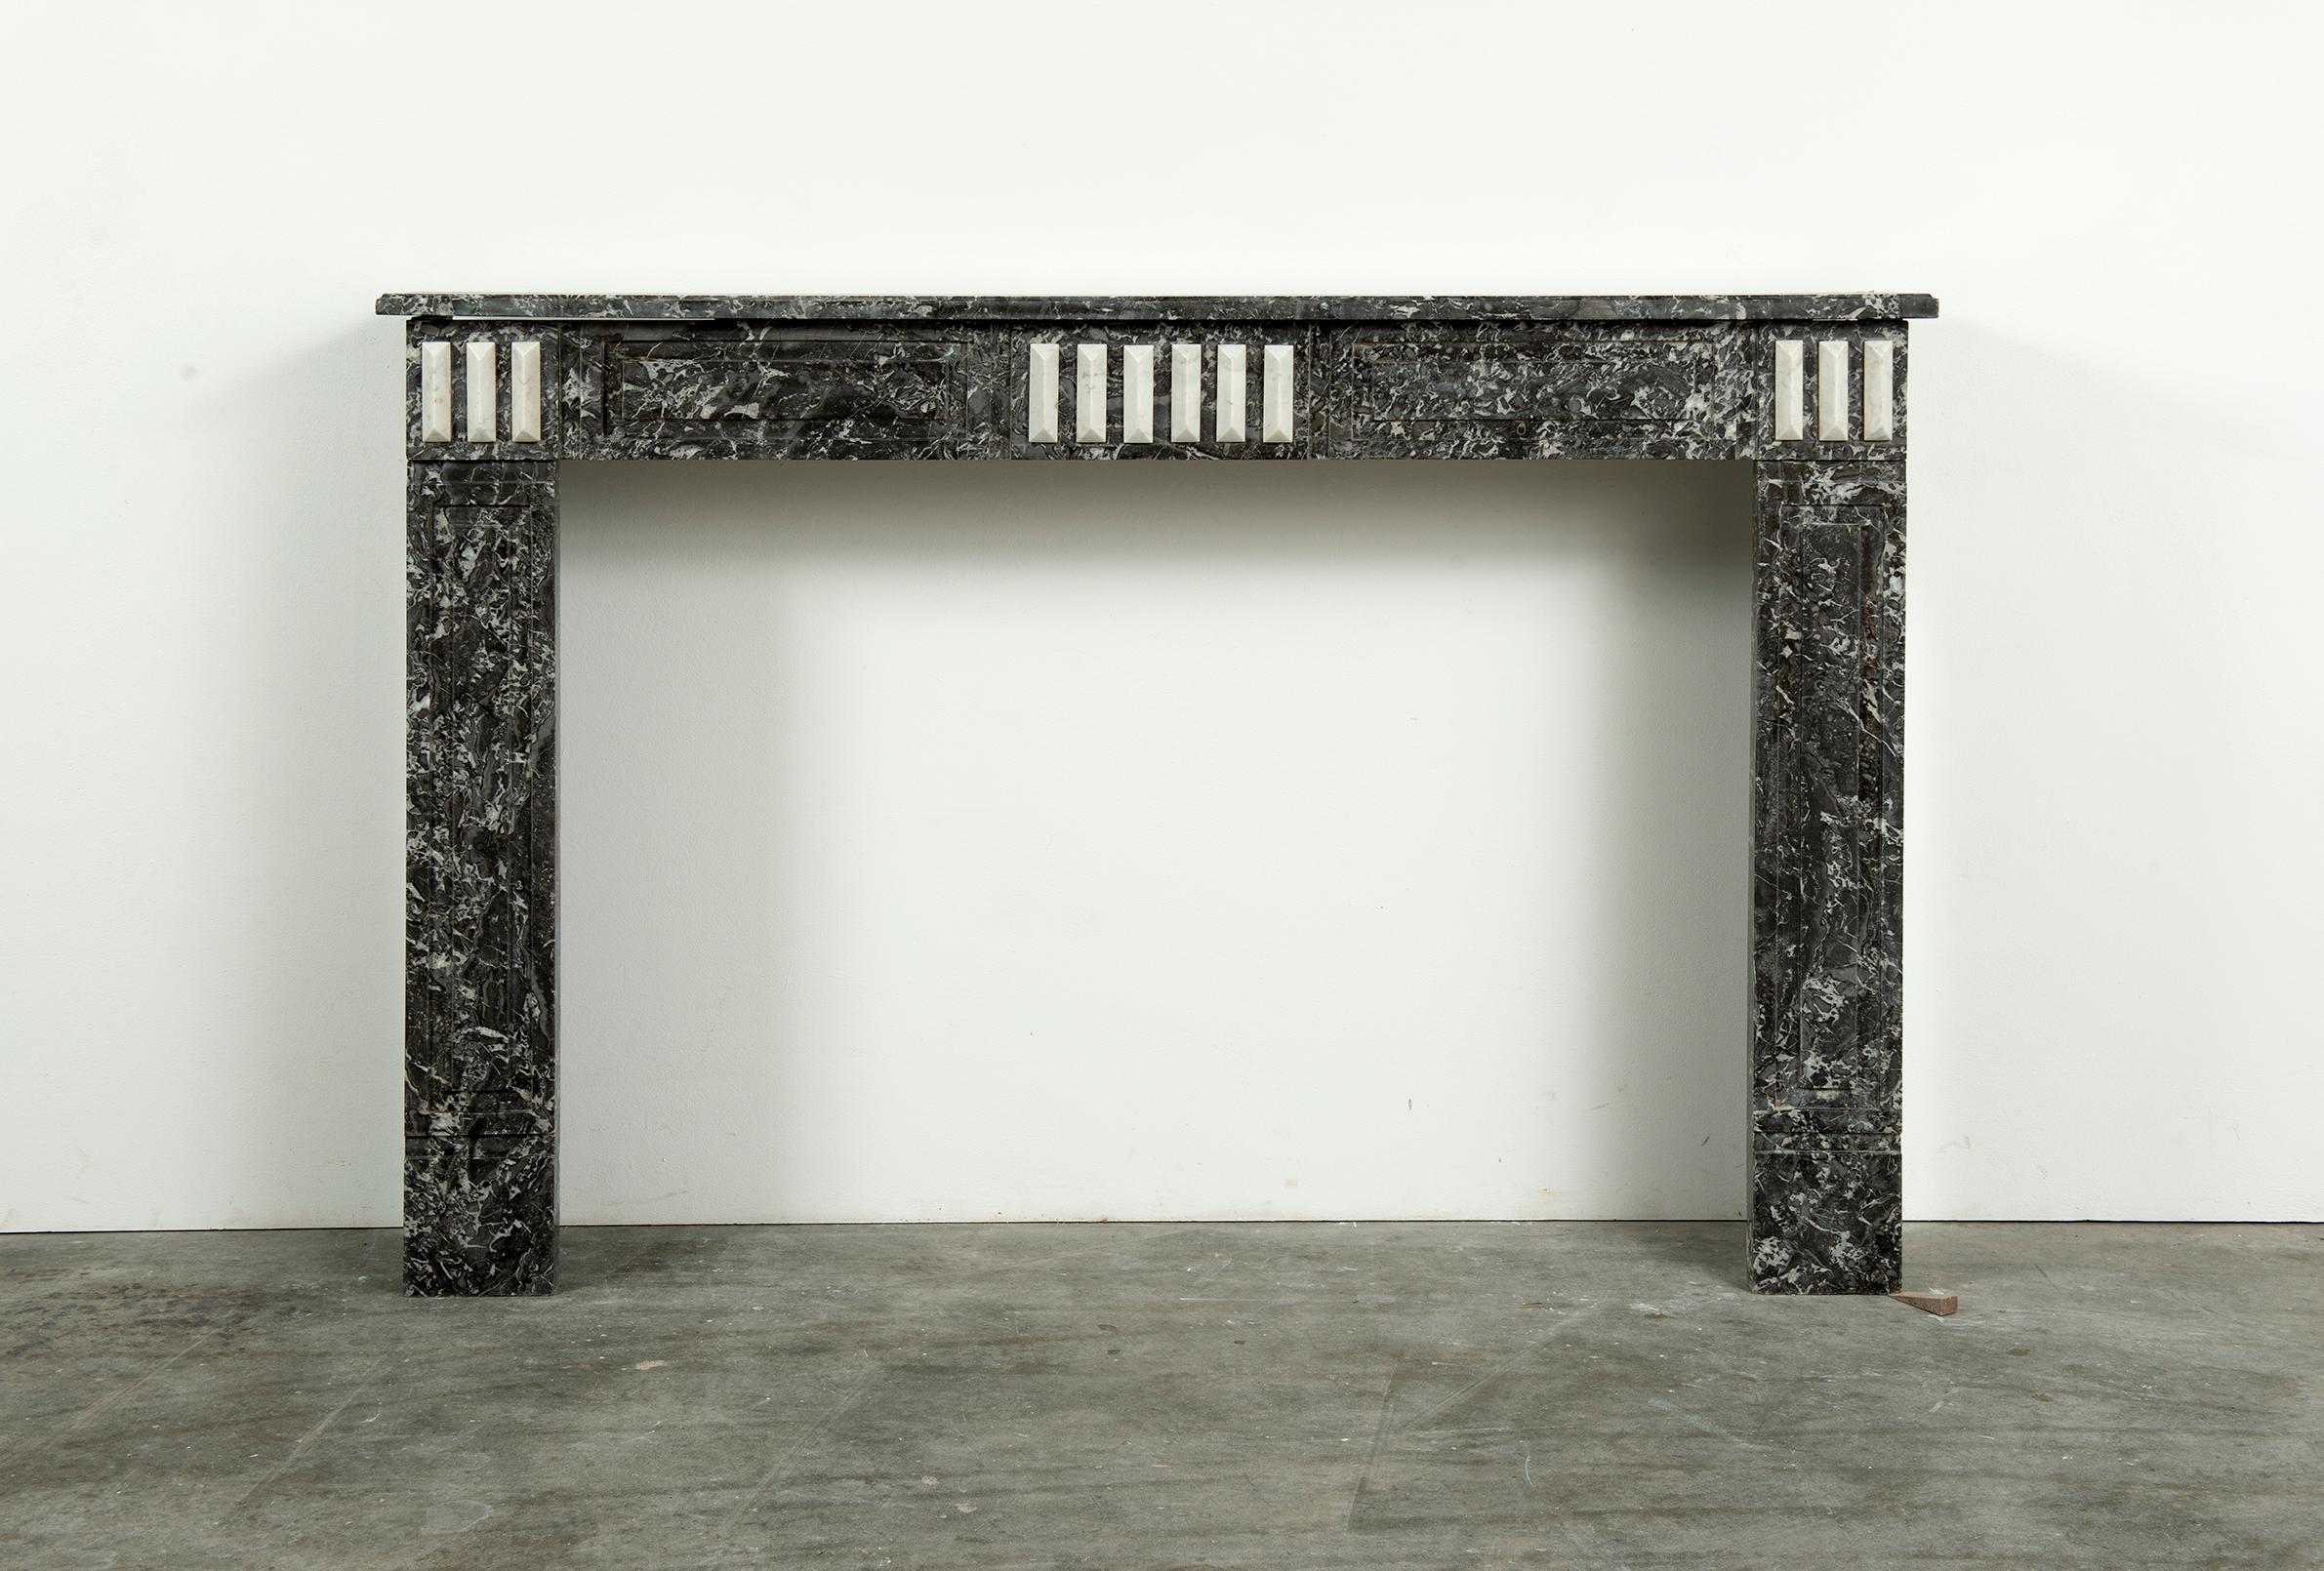 Antique French Louis XVI fireplace Mantel

A nice wide and decorative French Louis XVI executed in grey Saint Anne marble with Carrara white marble decorations.

The rectangular and profiled topshelf sits above a straight paneled freeze that is